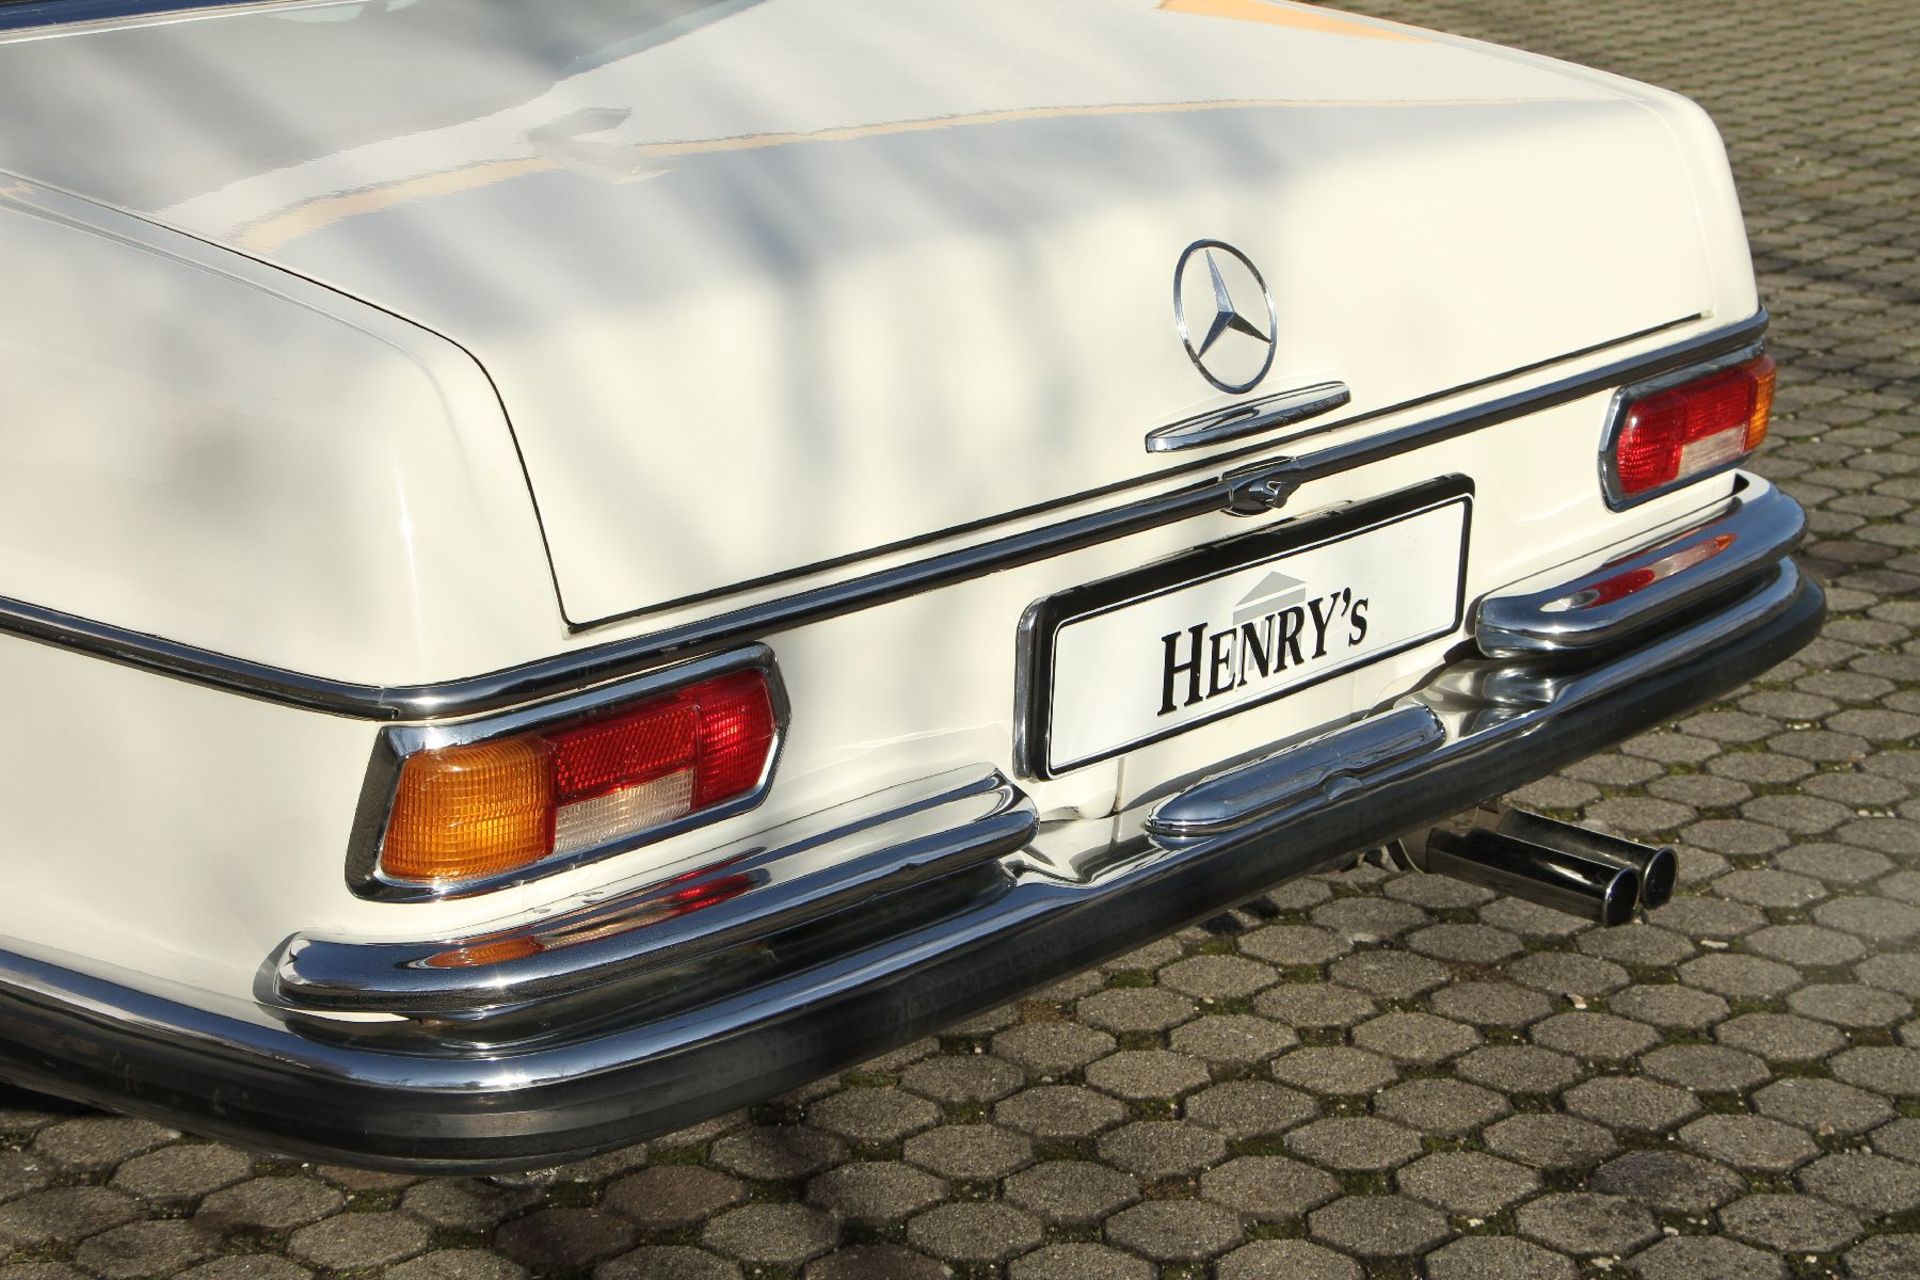 Mercedes-Benz 300 SEL 3,5, Chassis Number: 10905612007692, first registered 09/1971, german car with - Bild 6 aus 15